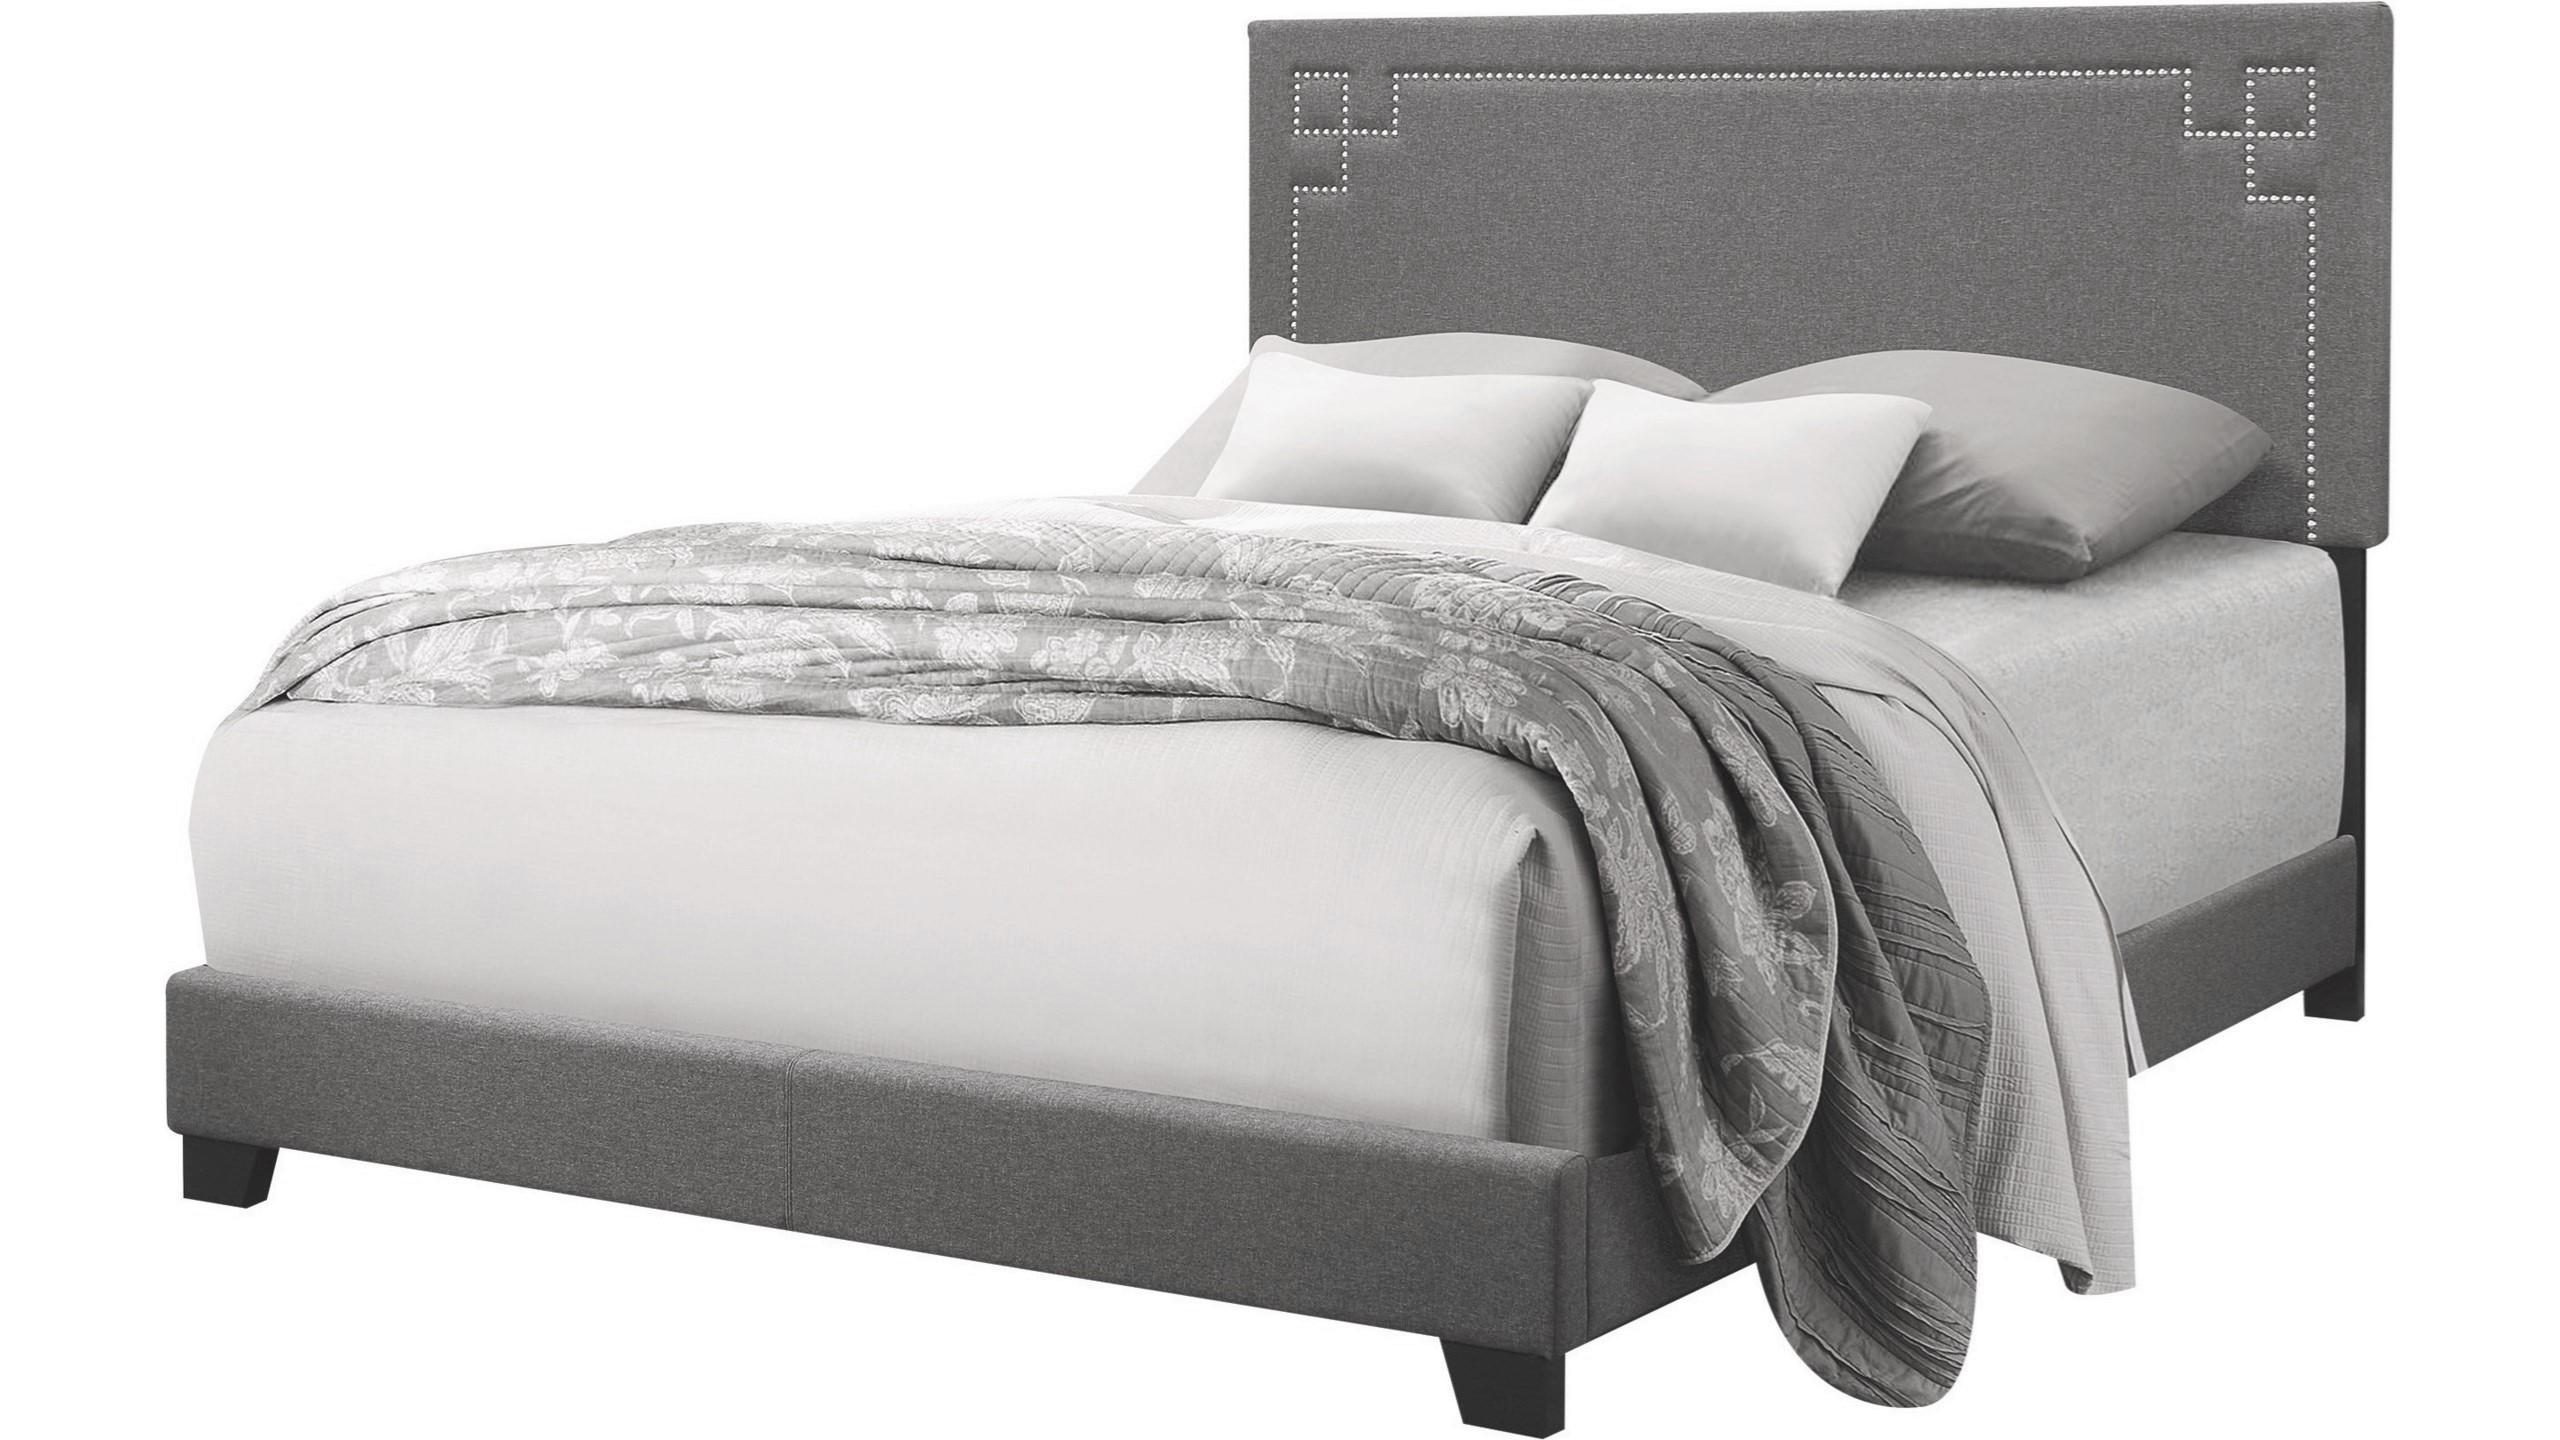 Transitional Queen Bed Ishiko 20910Q in Gray Fabric